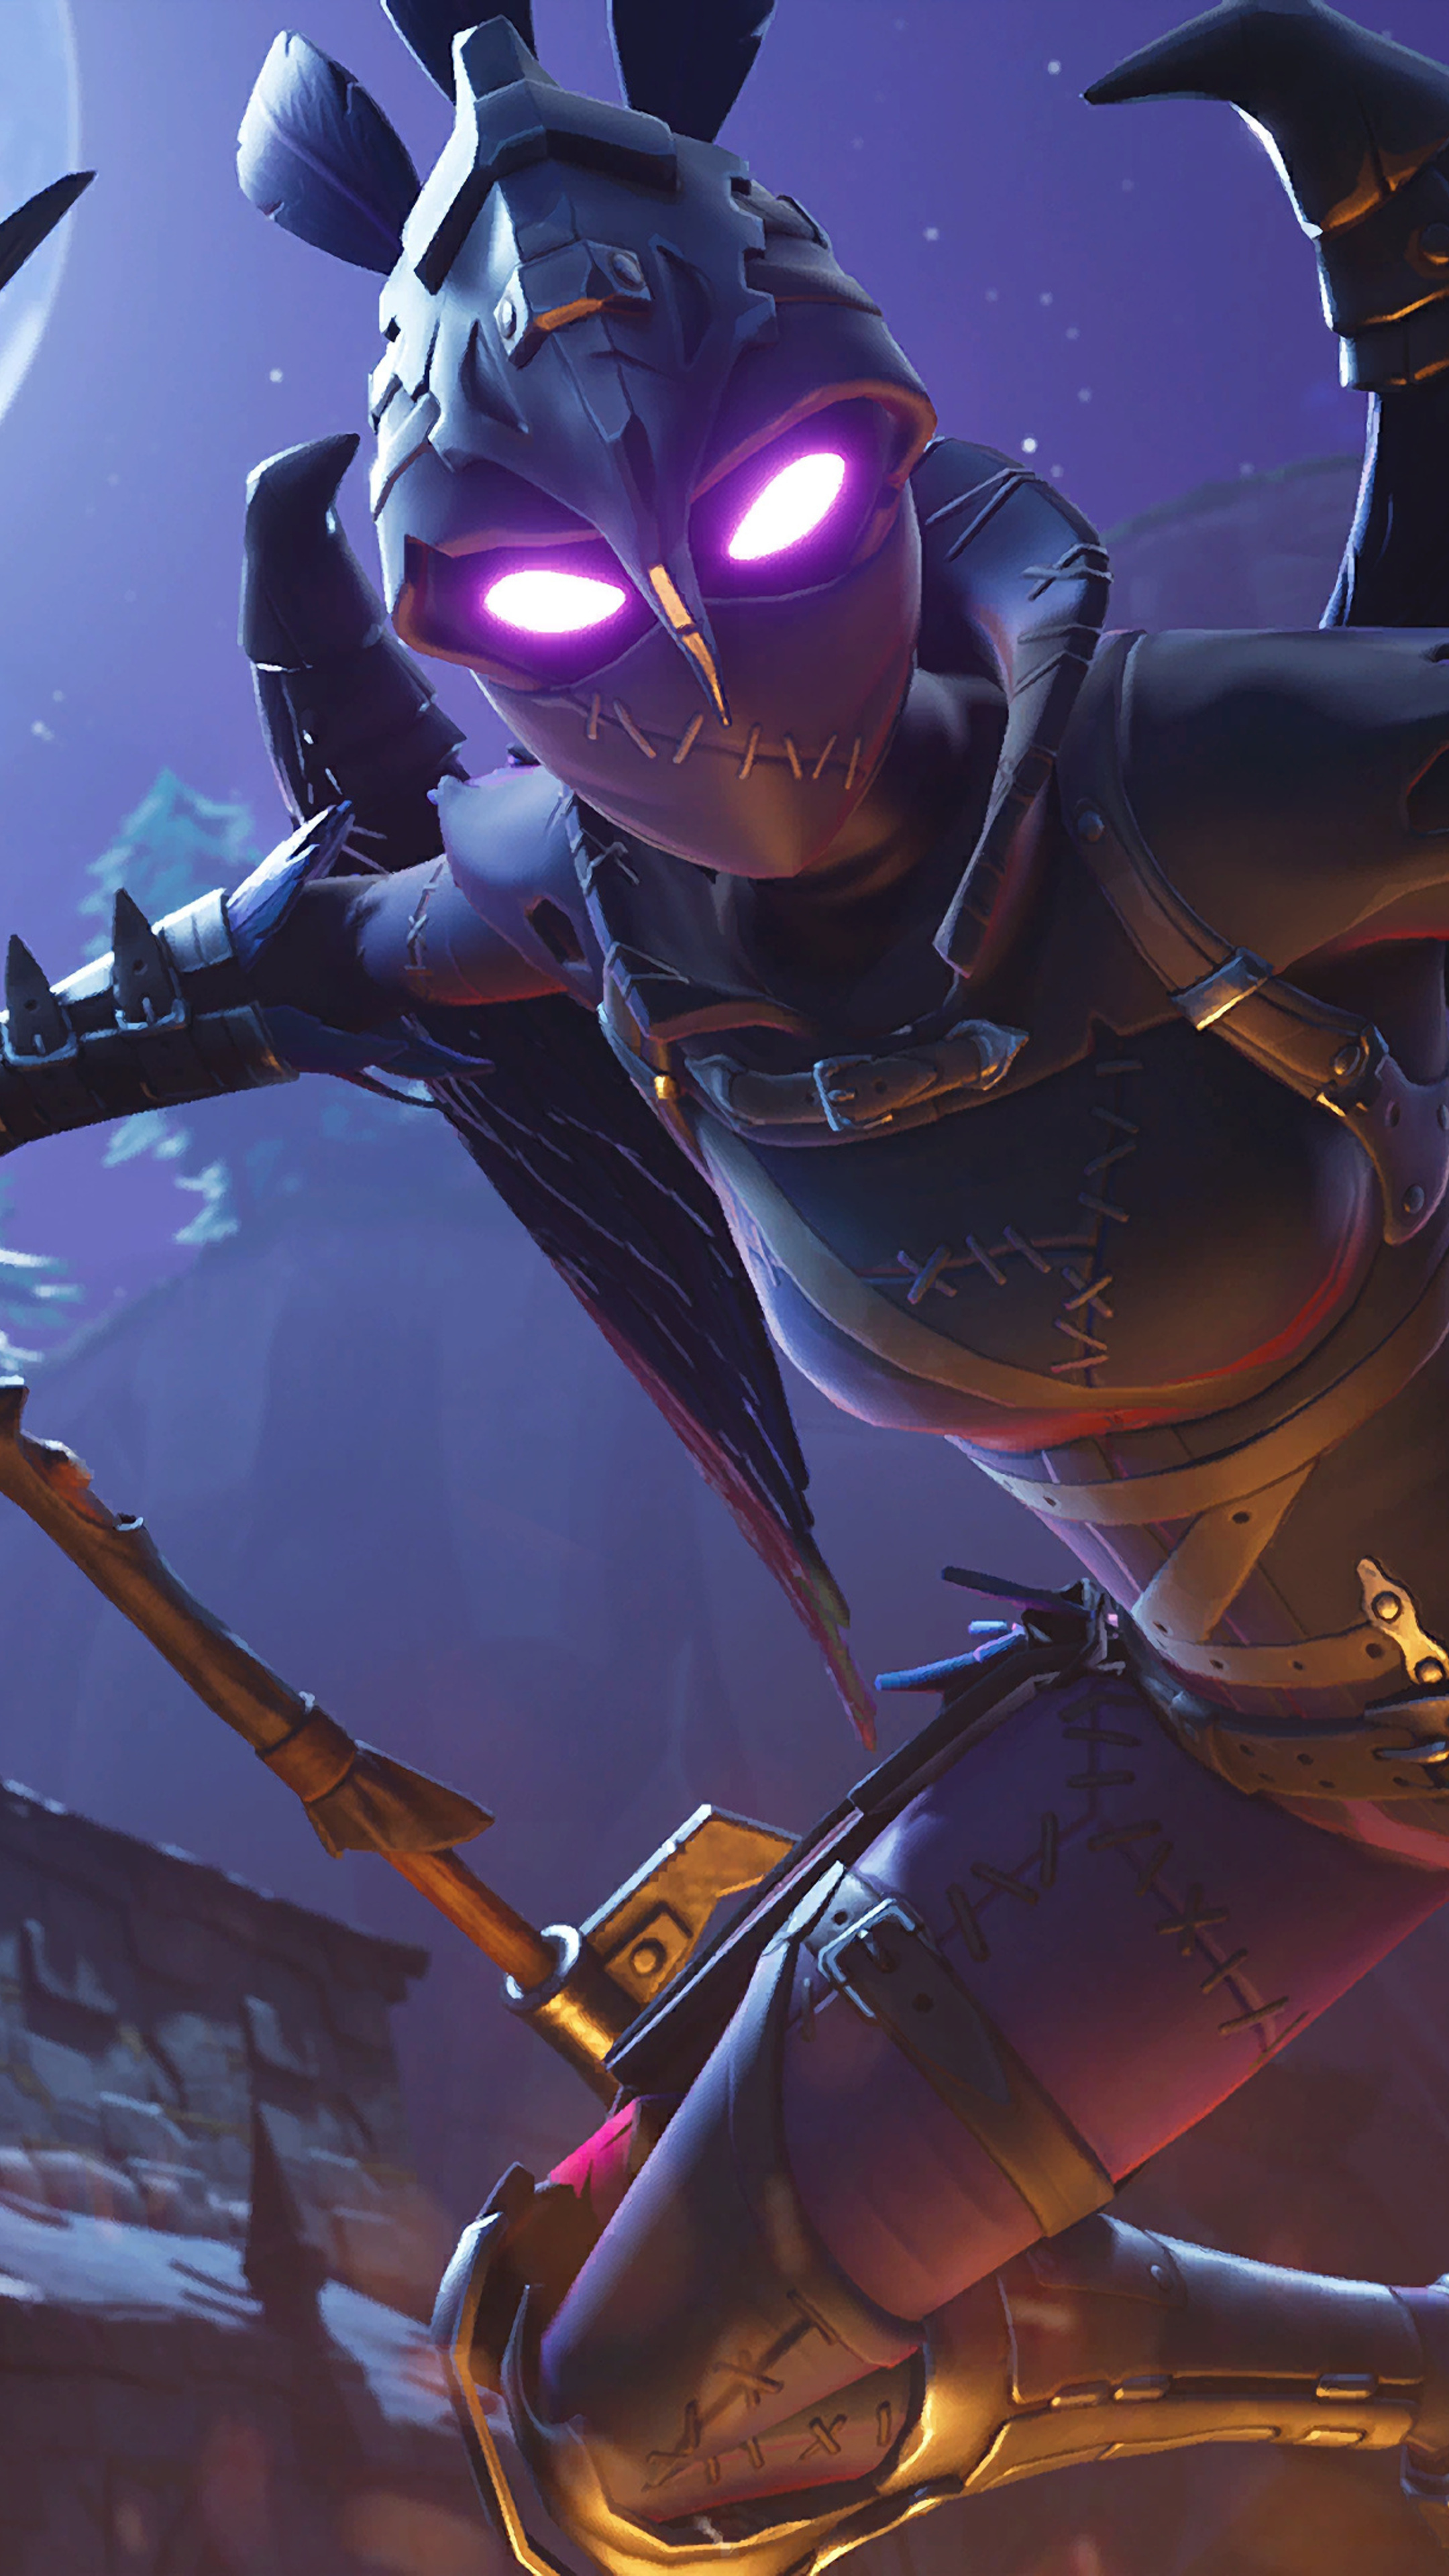 Battle Royale Game, Ravage outfit, Fortnite season 6, Gaming excitement, 2160x3840 4K Phone